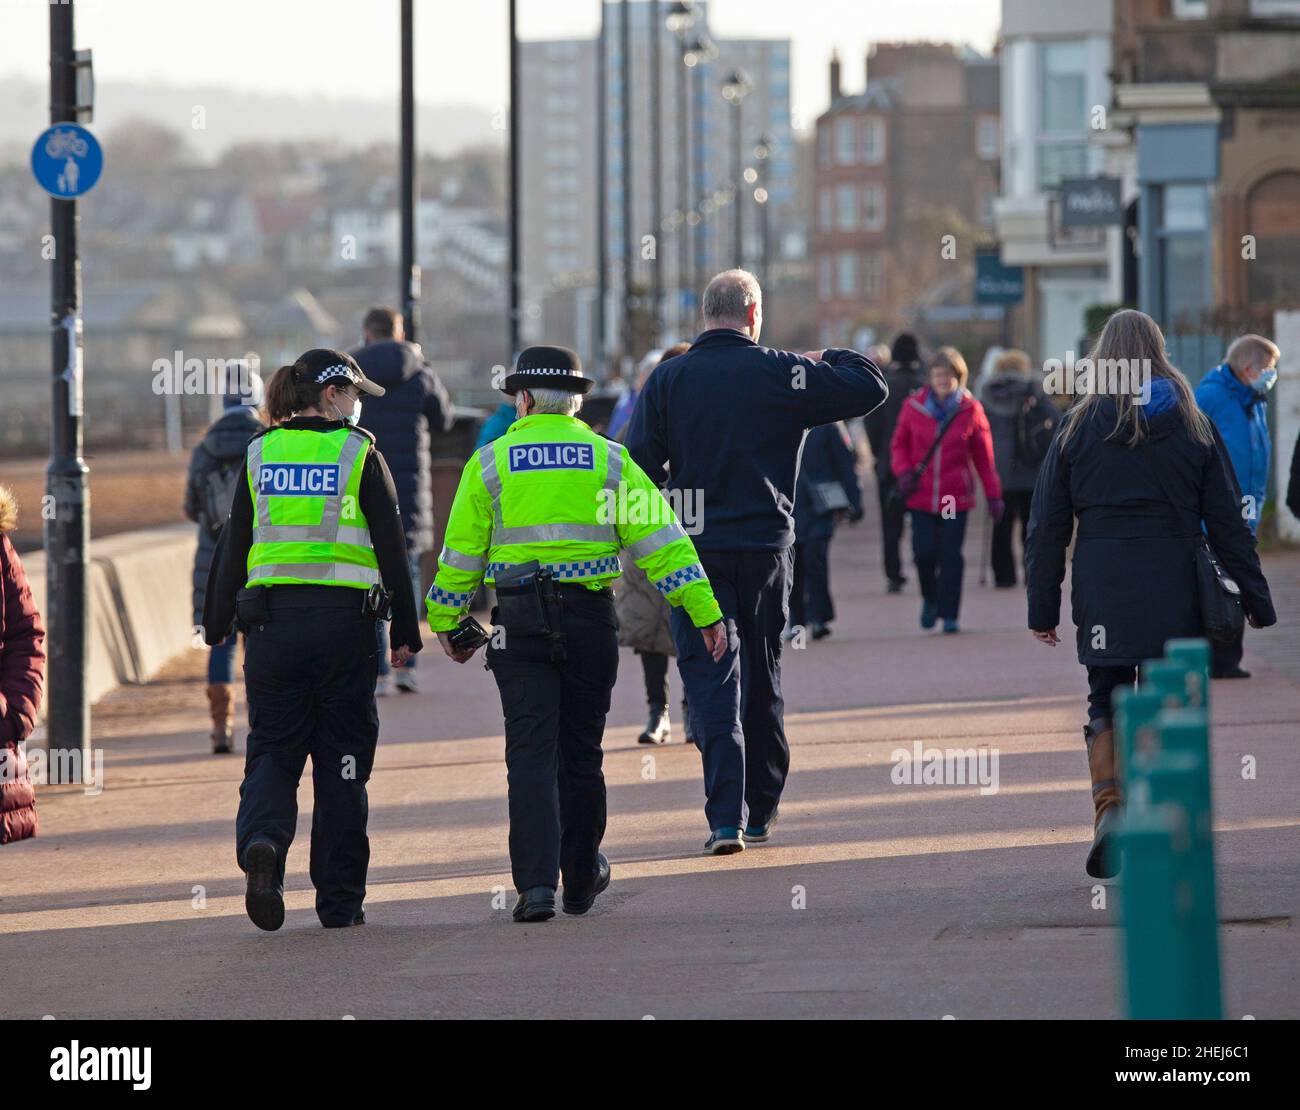 Portobello, Edinburgh, Scotland, UK. 11th Jan, 2022. Police presence on promenade the female officers had been asking members of the public for any detailed information regarding missing Alathea (Alice) Byrne if they were at the beach on the morning of 1st January 2022 when the young woman was last seen, taking thorough notes from anyone who was. Officers are also conducting house to house enquiries in the Portobello area. Credit: Archwhite/Alamy Live News Stock Photo